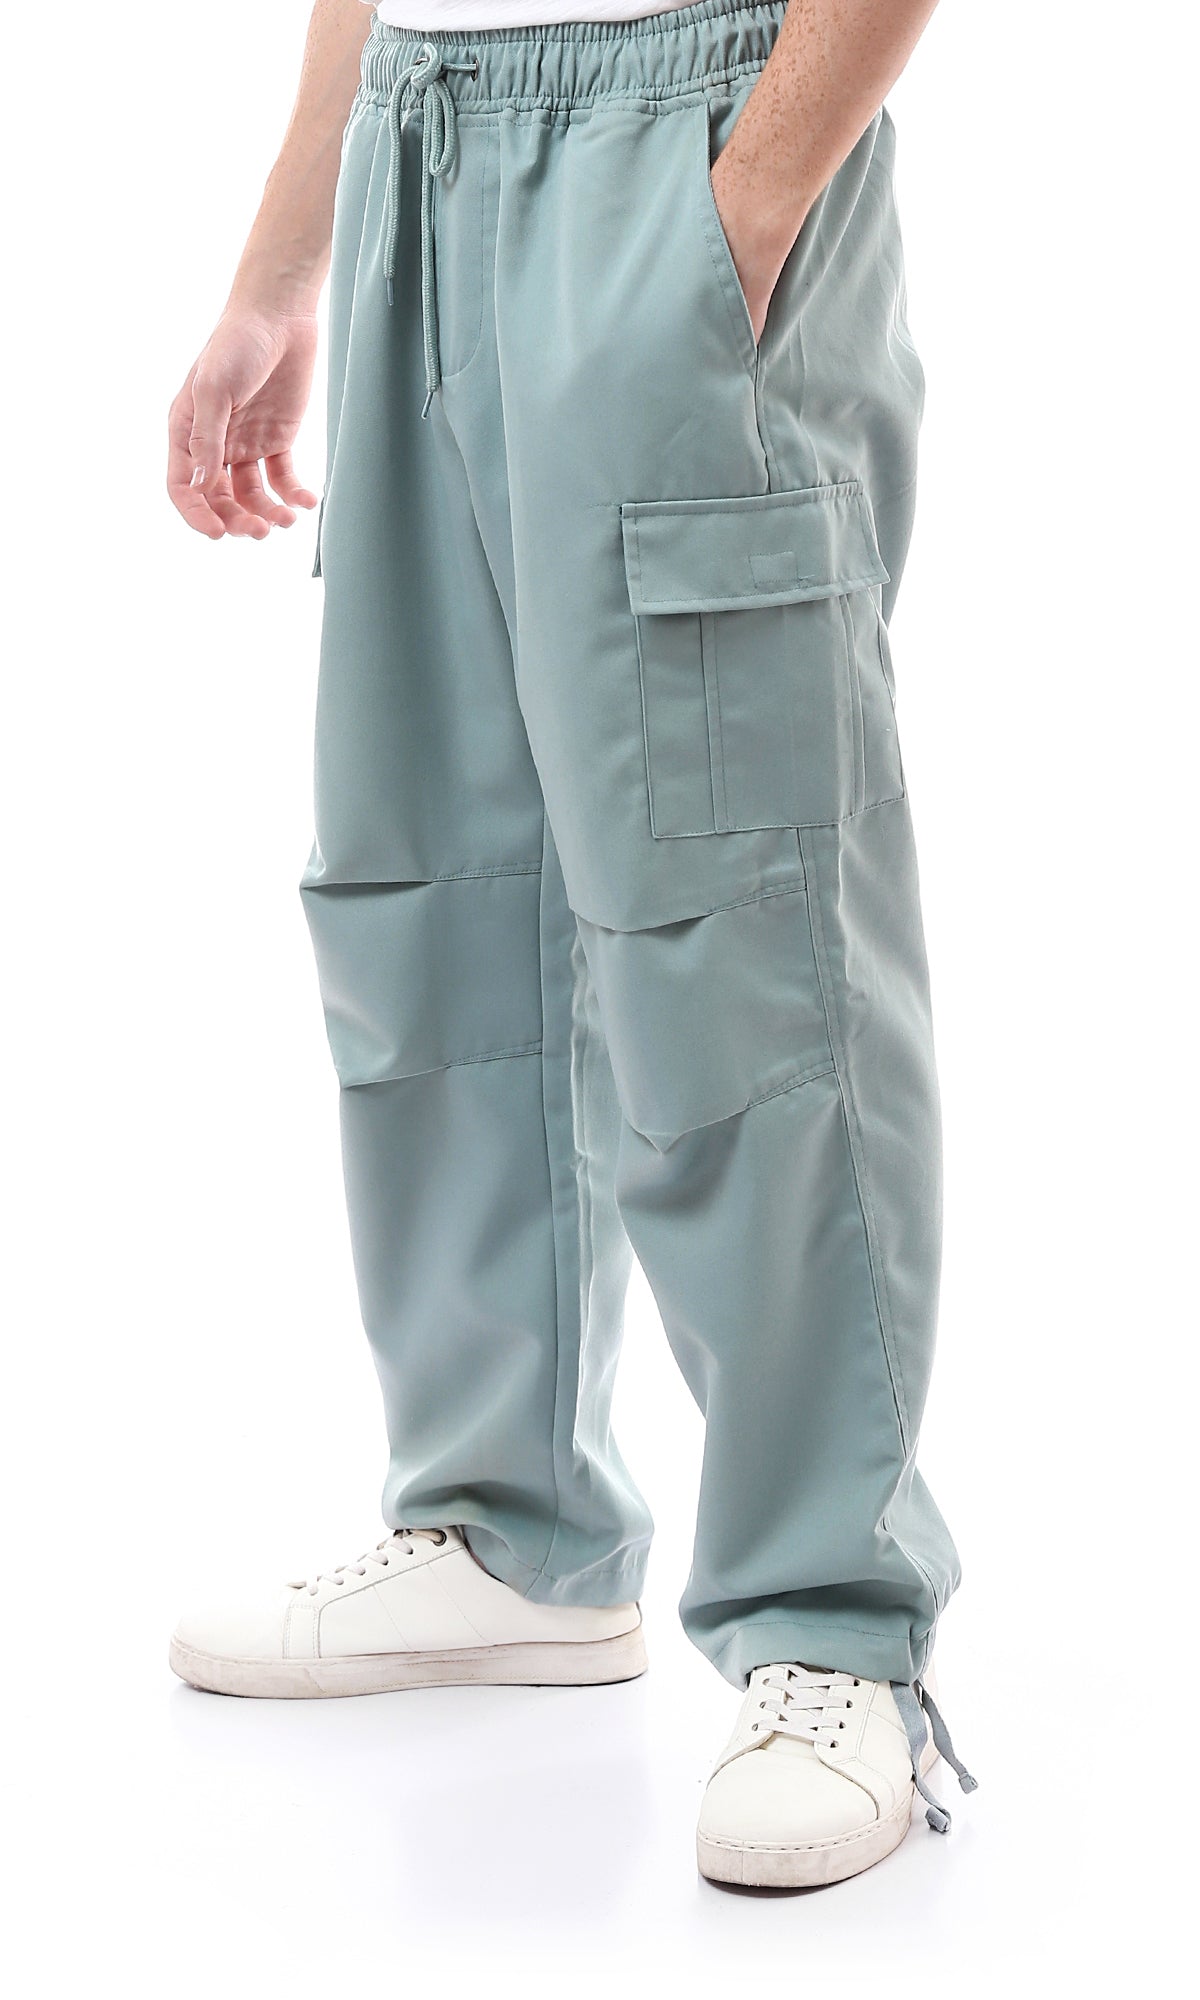 O170541 Mint Green Cargo Pants With Multi-Pockets